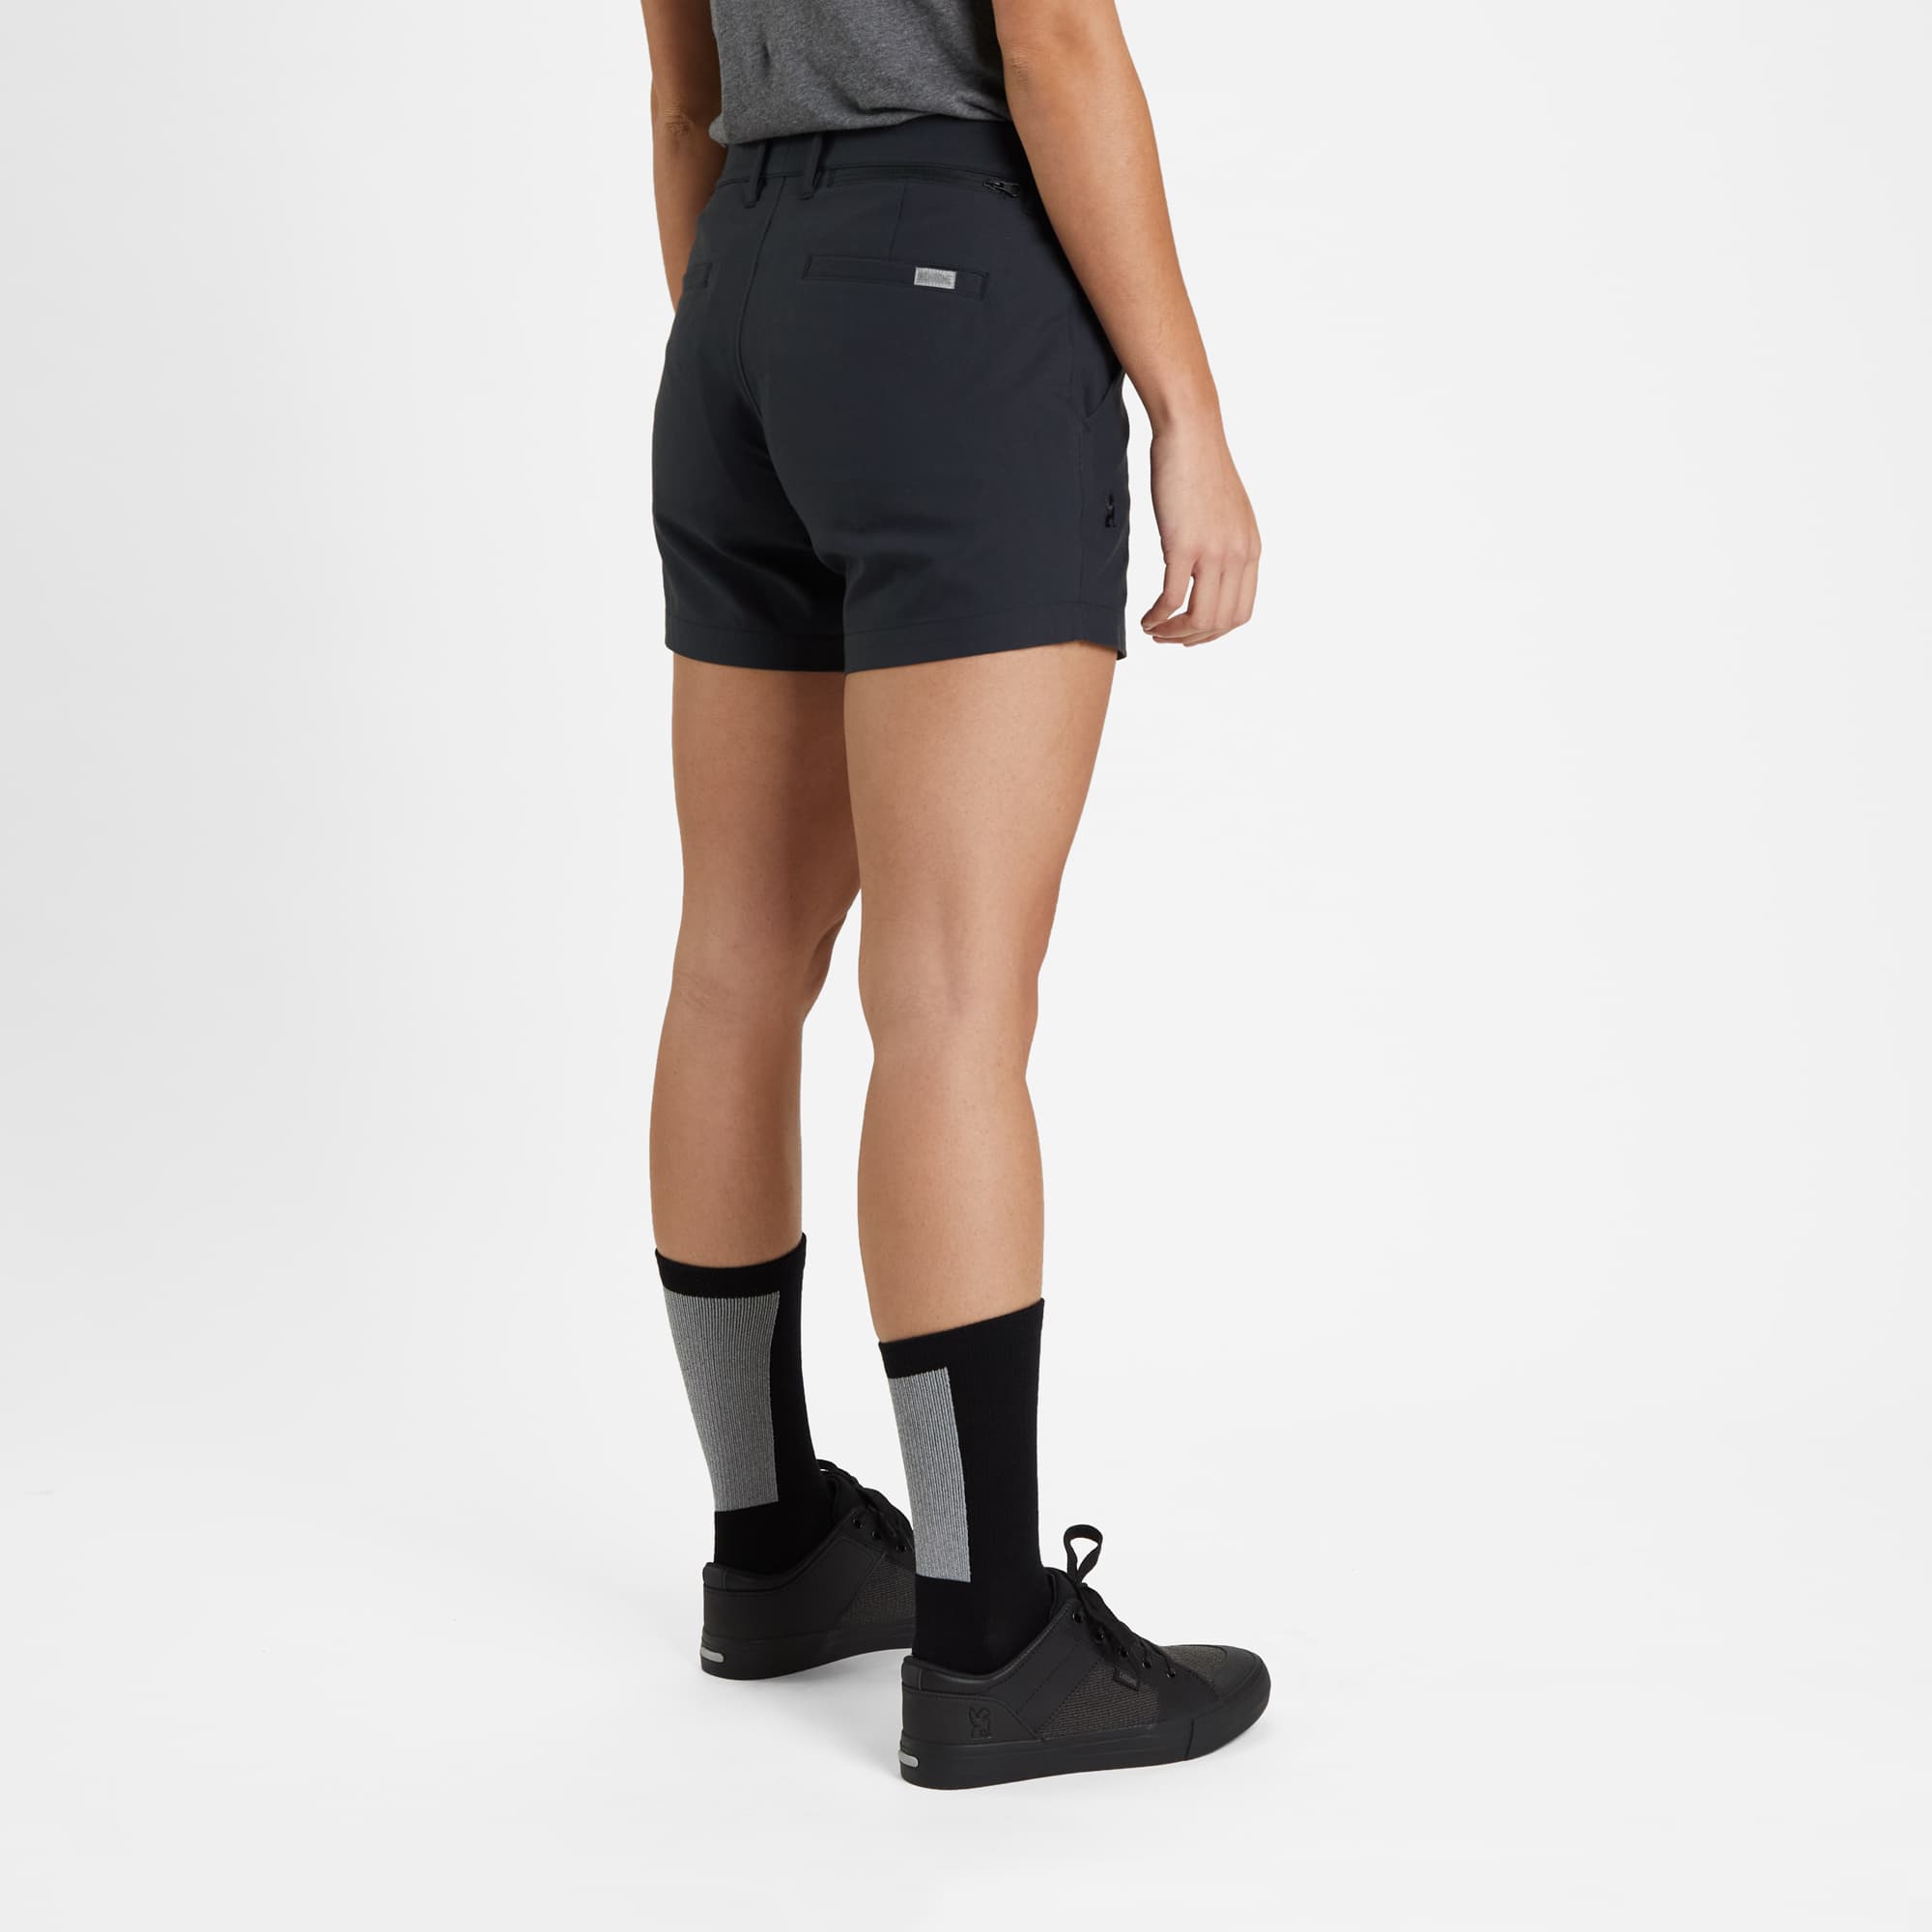 Women's Seneca Short in black worn by a woman right side view #color_black